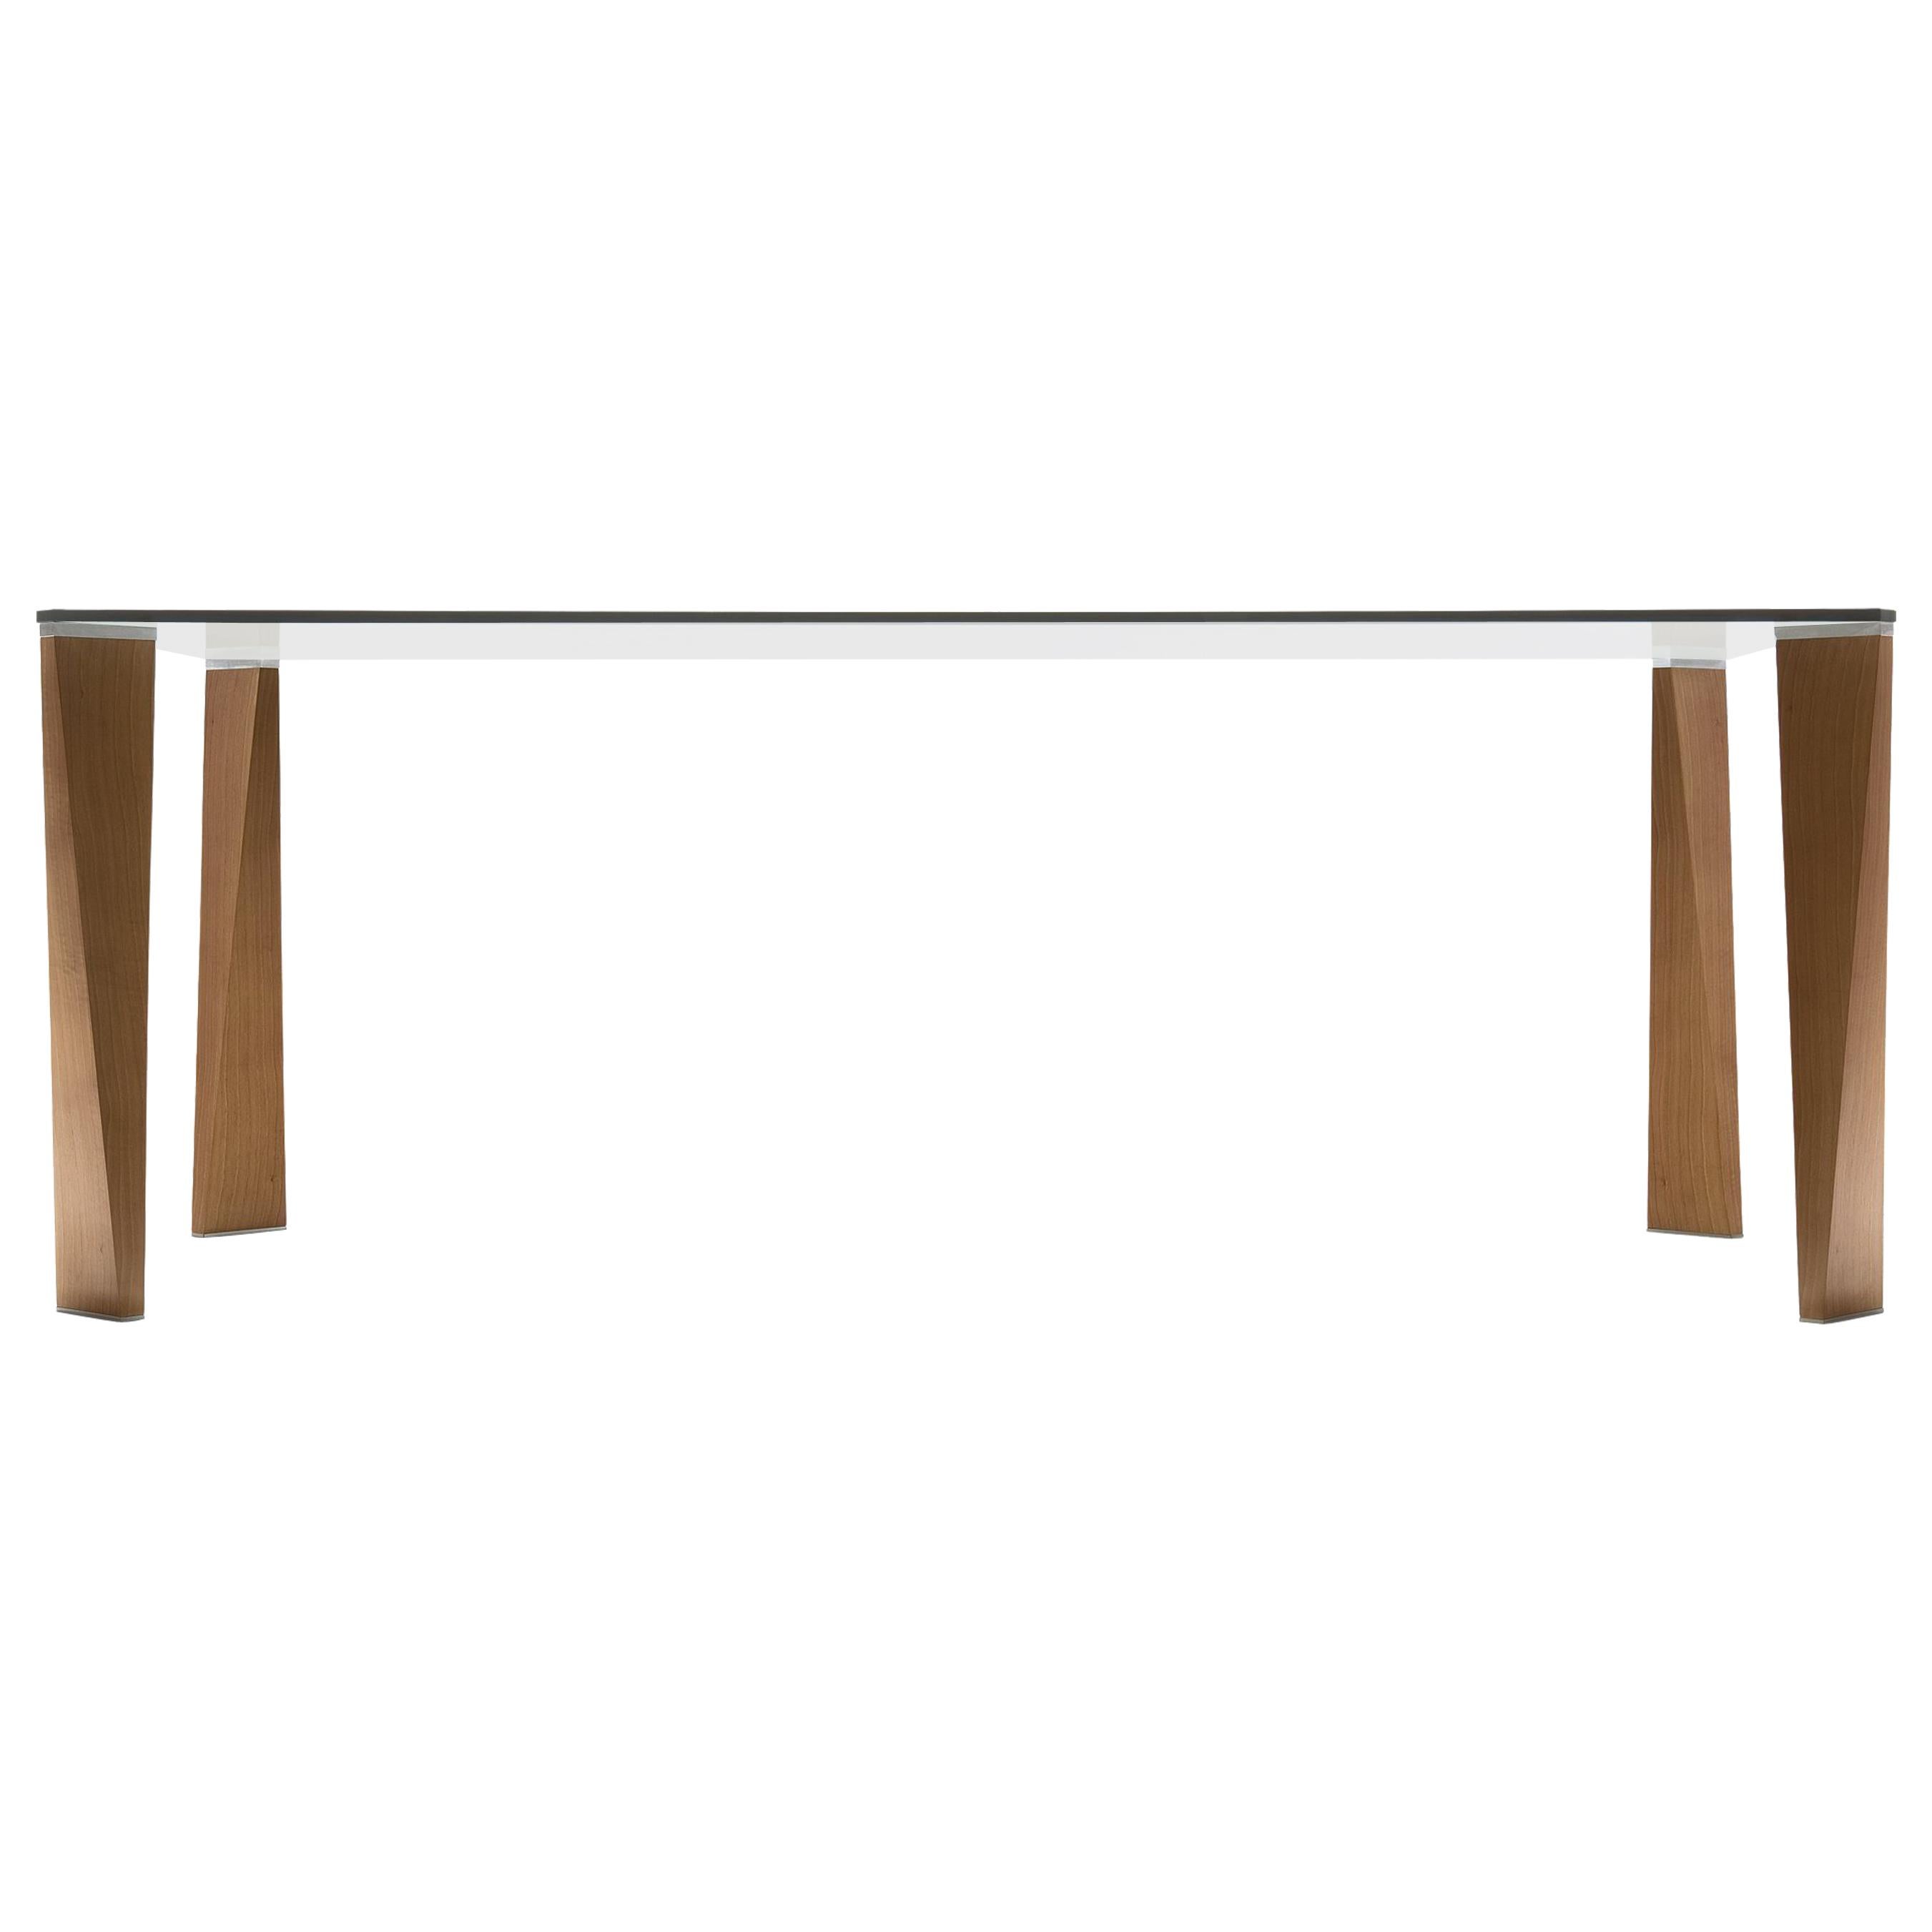 Dandy Dining Table with Brown Veneered Wood Legs & Glass Top, Pacini & Cappellin For Sale